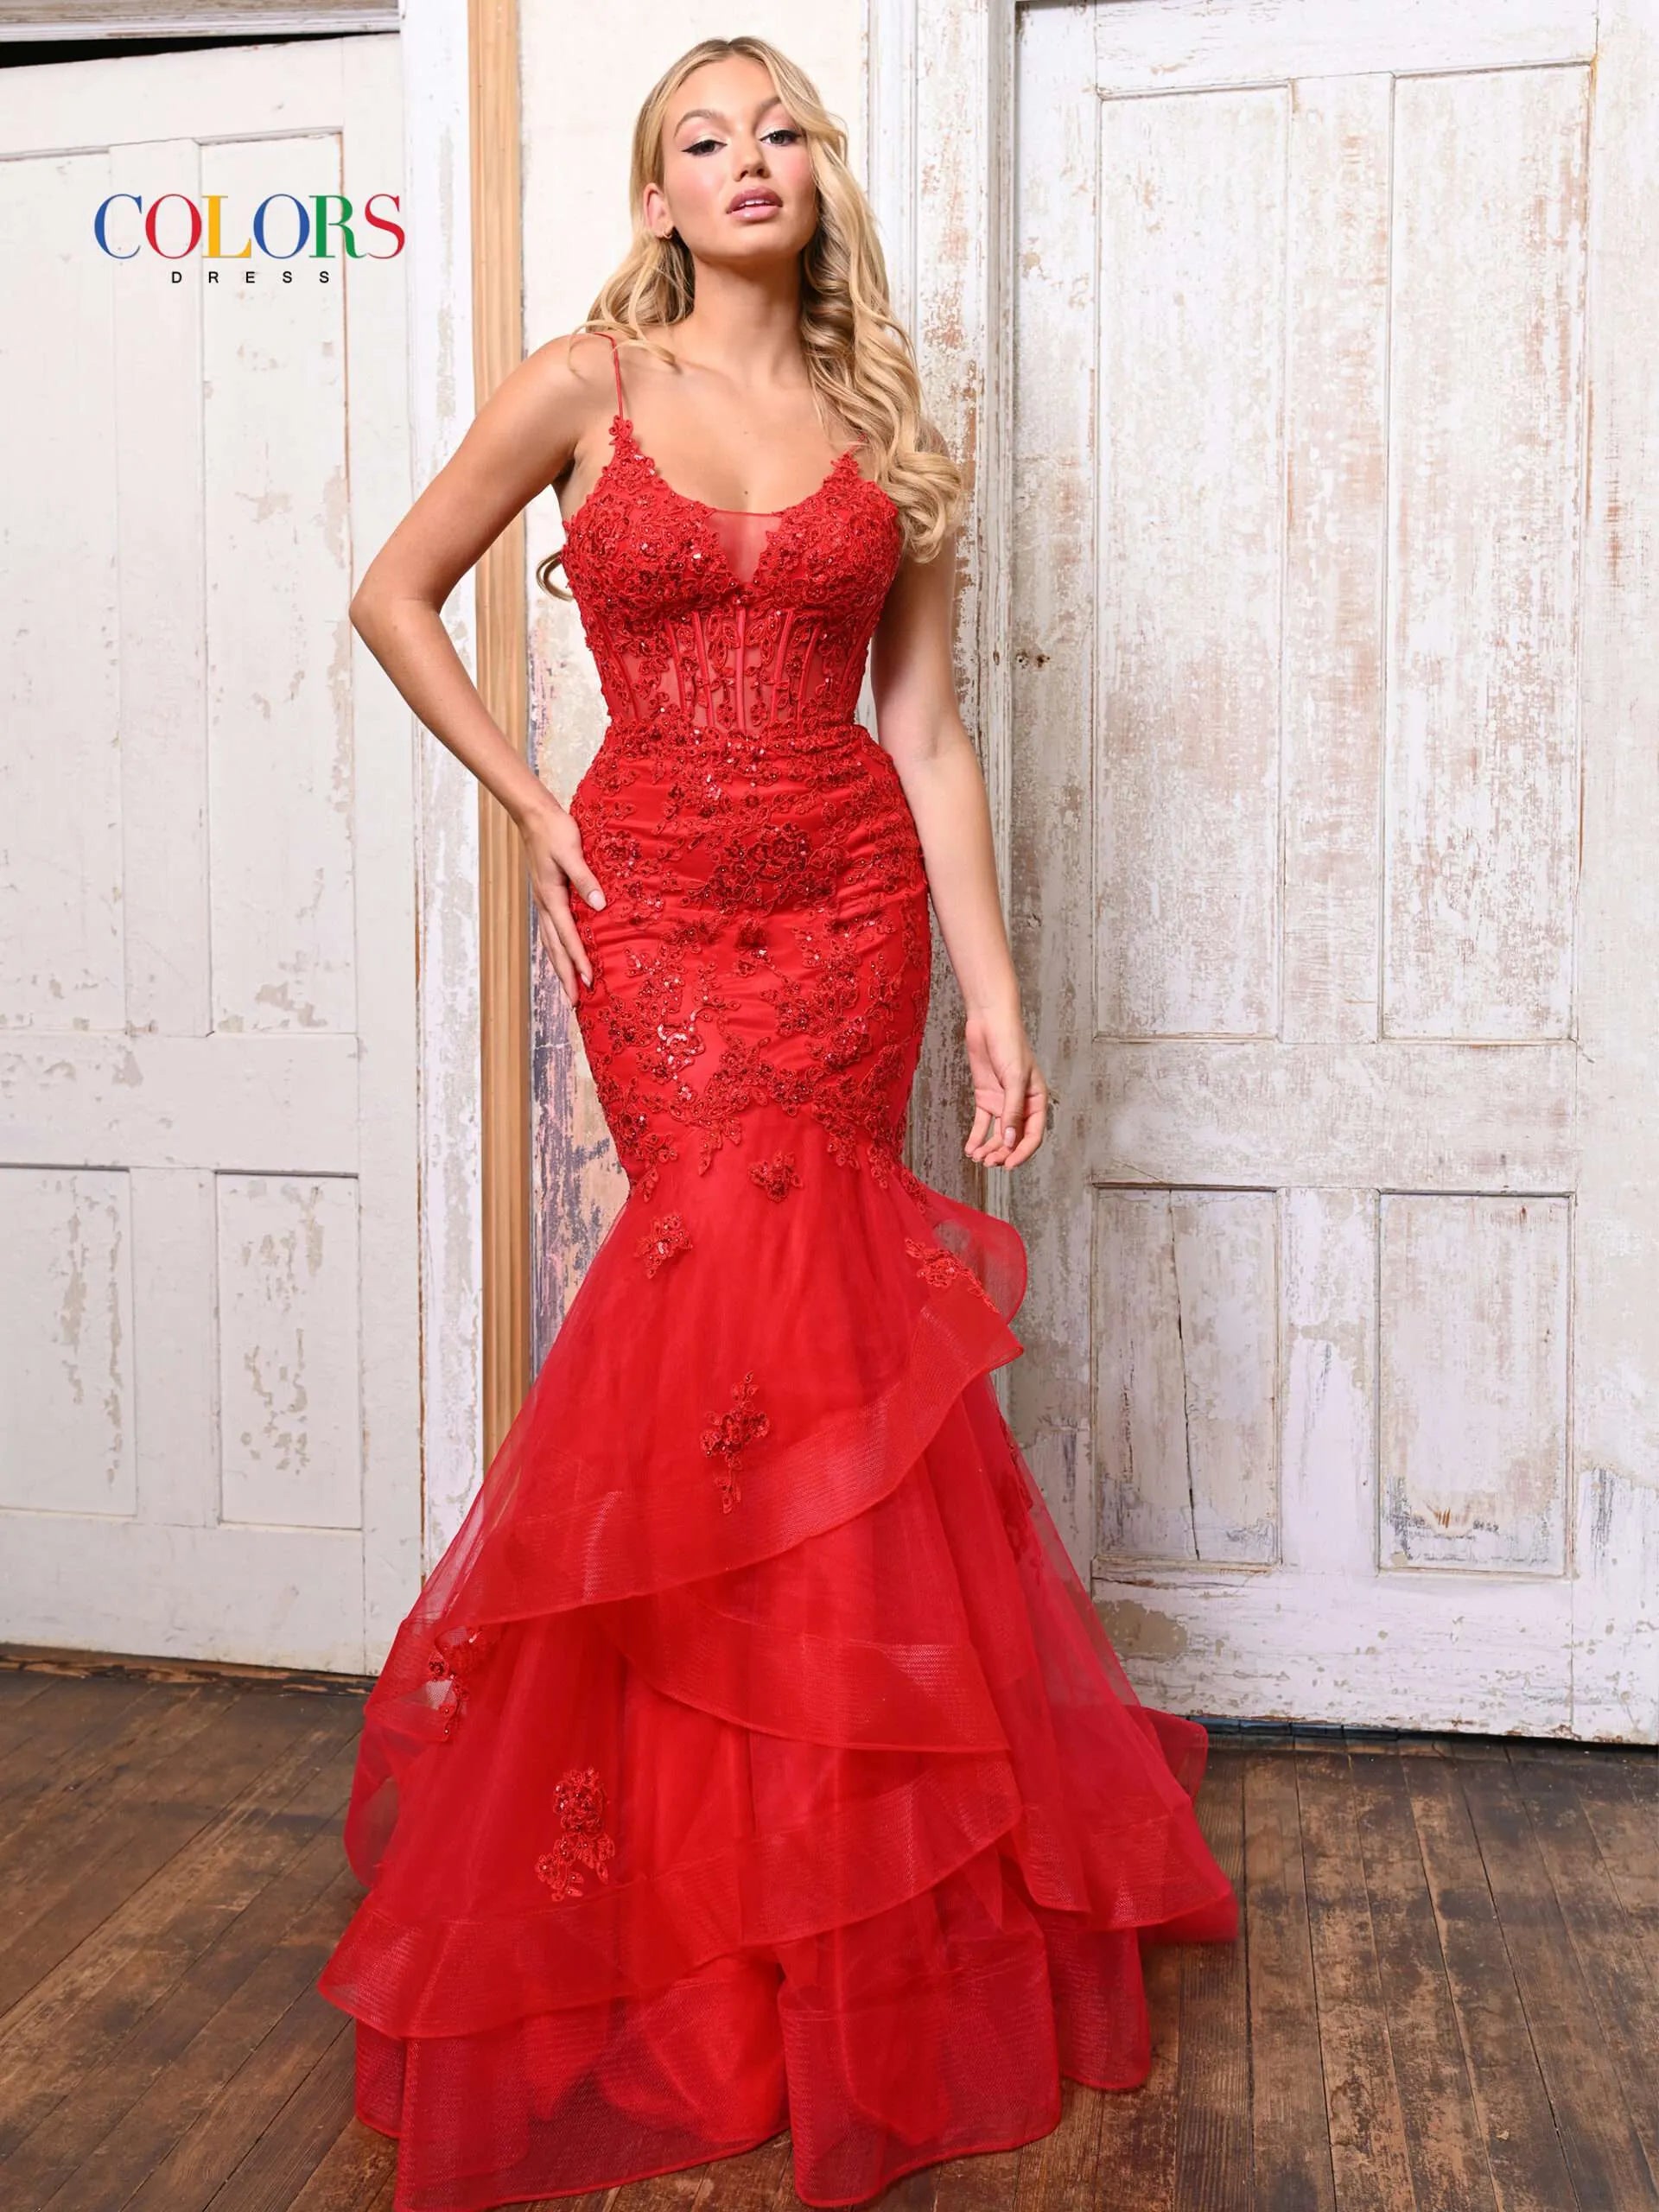 Colors Dress 2899 Long Prom Dress Fitted Mermaid Corset Lace Applique  Layered Tulle Formal Pageant Gown